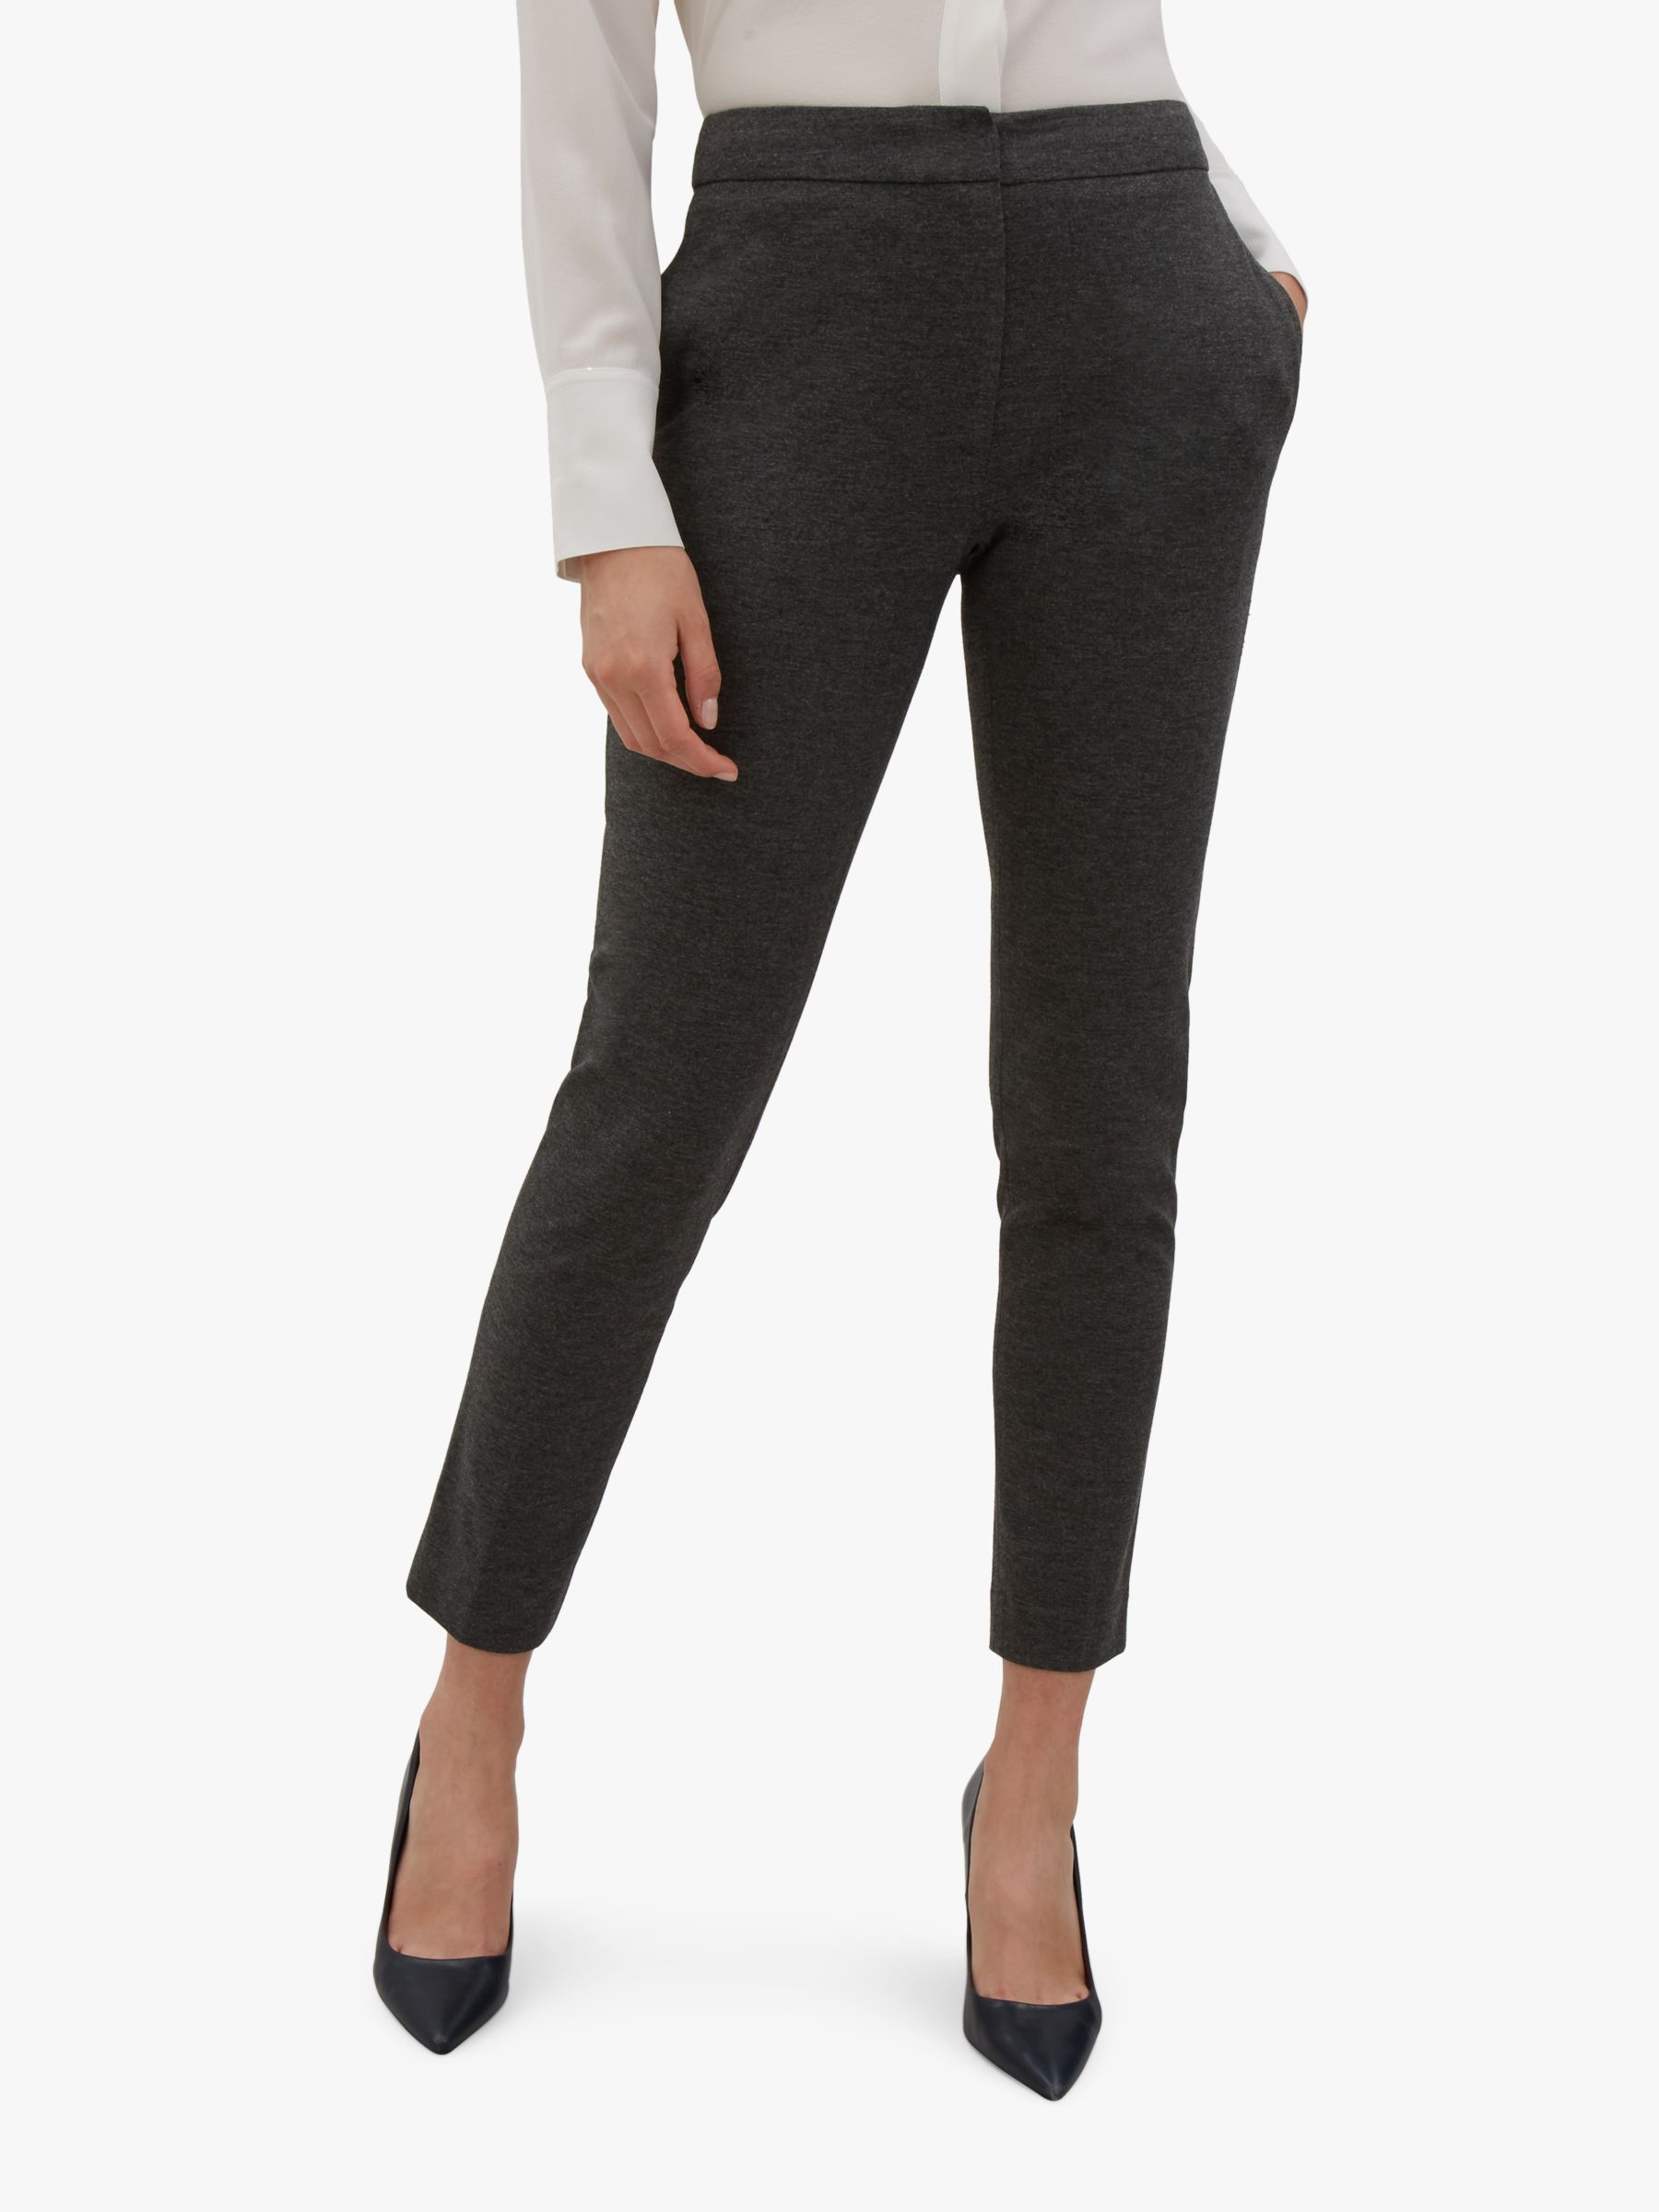 grey fitted trousers womens